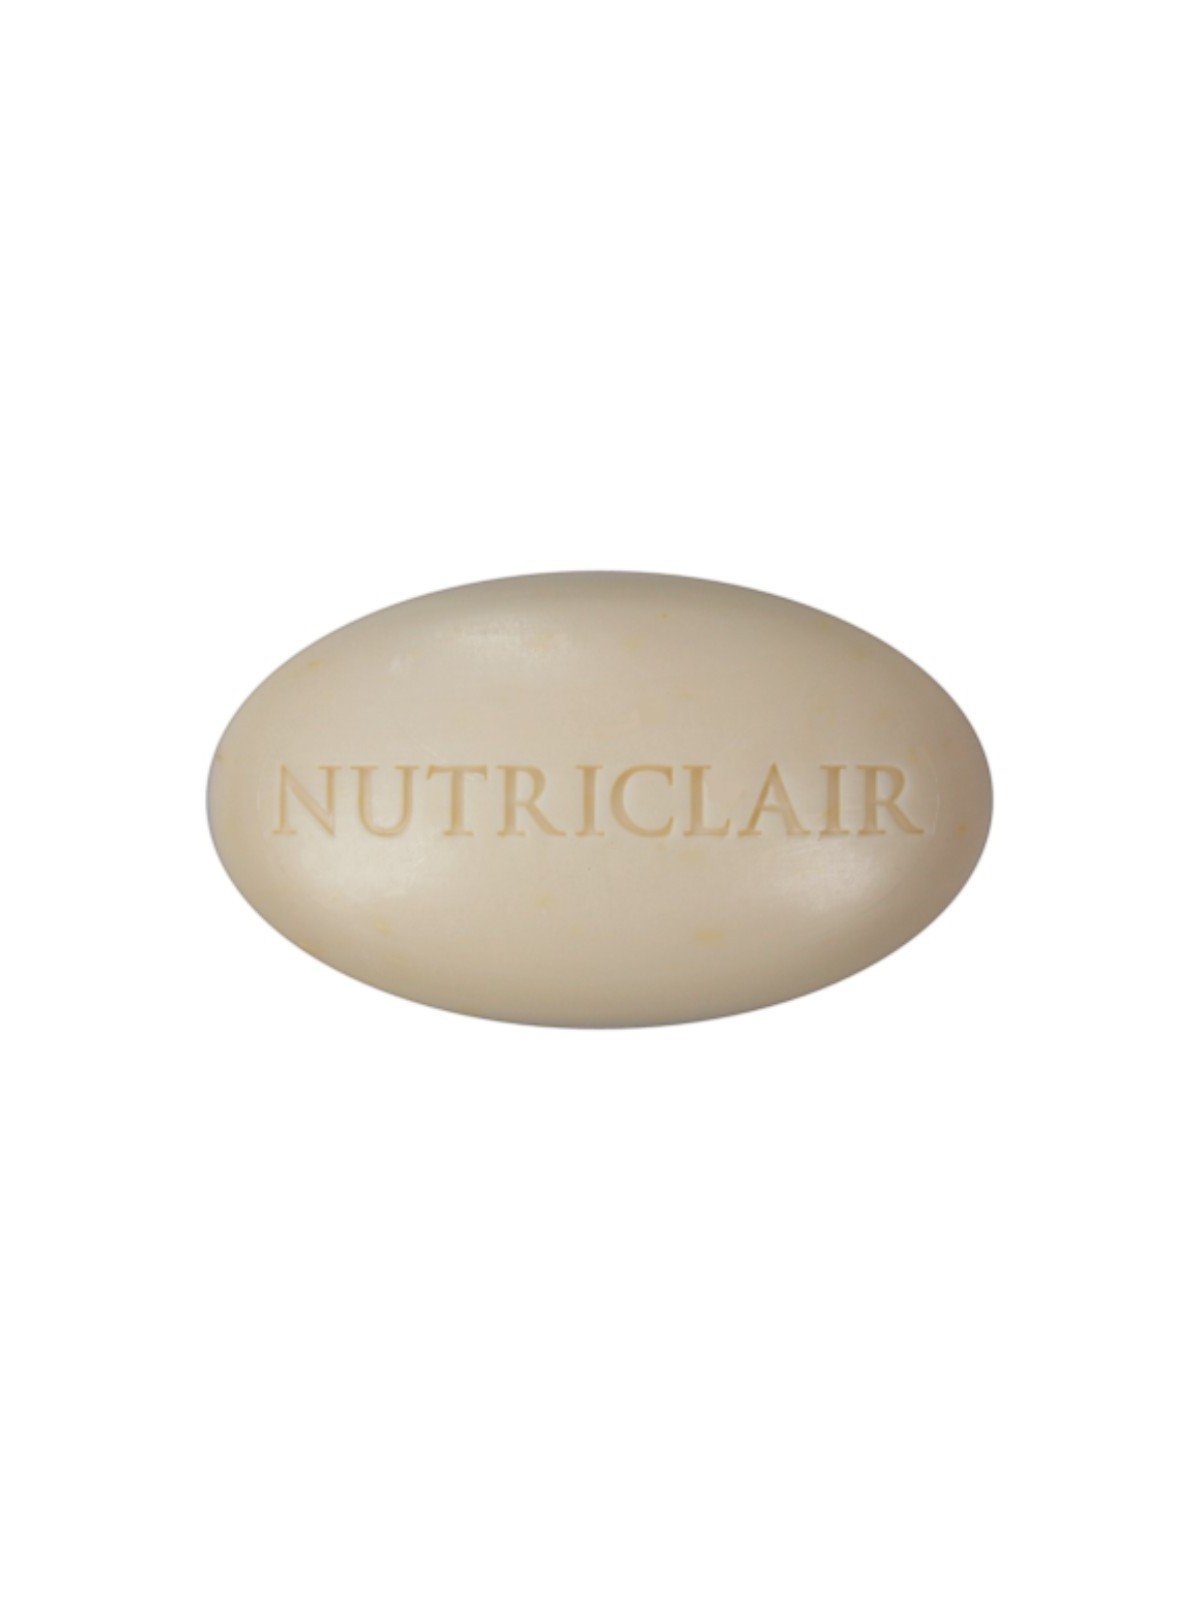 WHITENING AND MOISTURIZING SOAP 165 g NUTRICLAIR